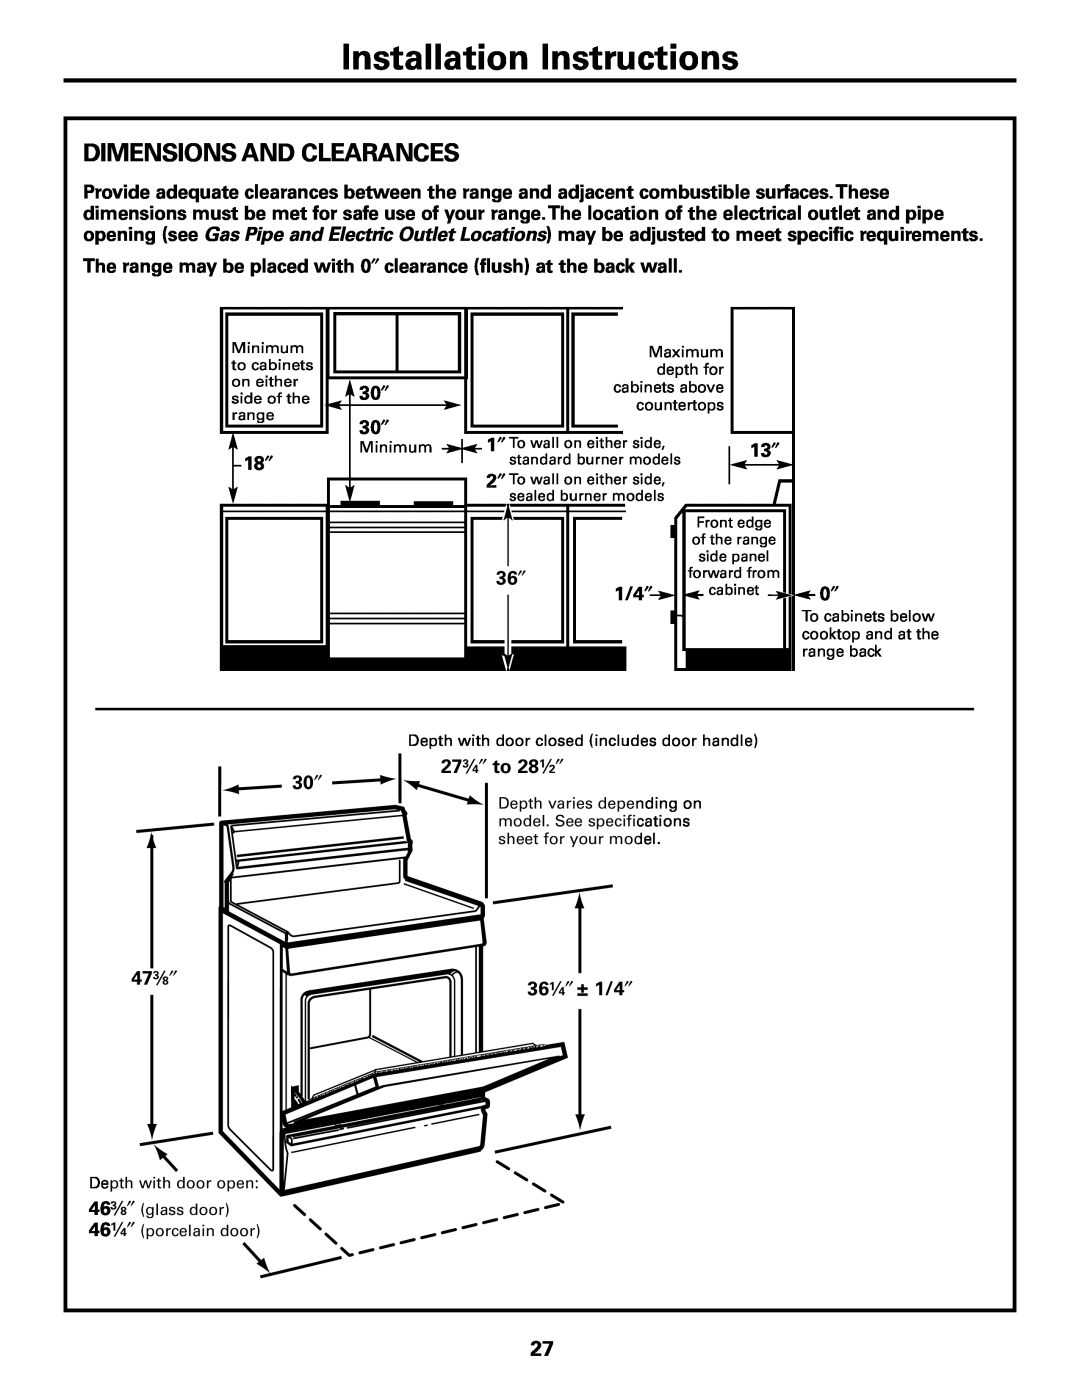 Americana Appliances AGBS300 Dimensions And Clearances, Installation Instructions, 30″ 30″, 1/4″, 273⁄4″ to 281⁄2″, 473⁄8″ 